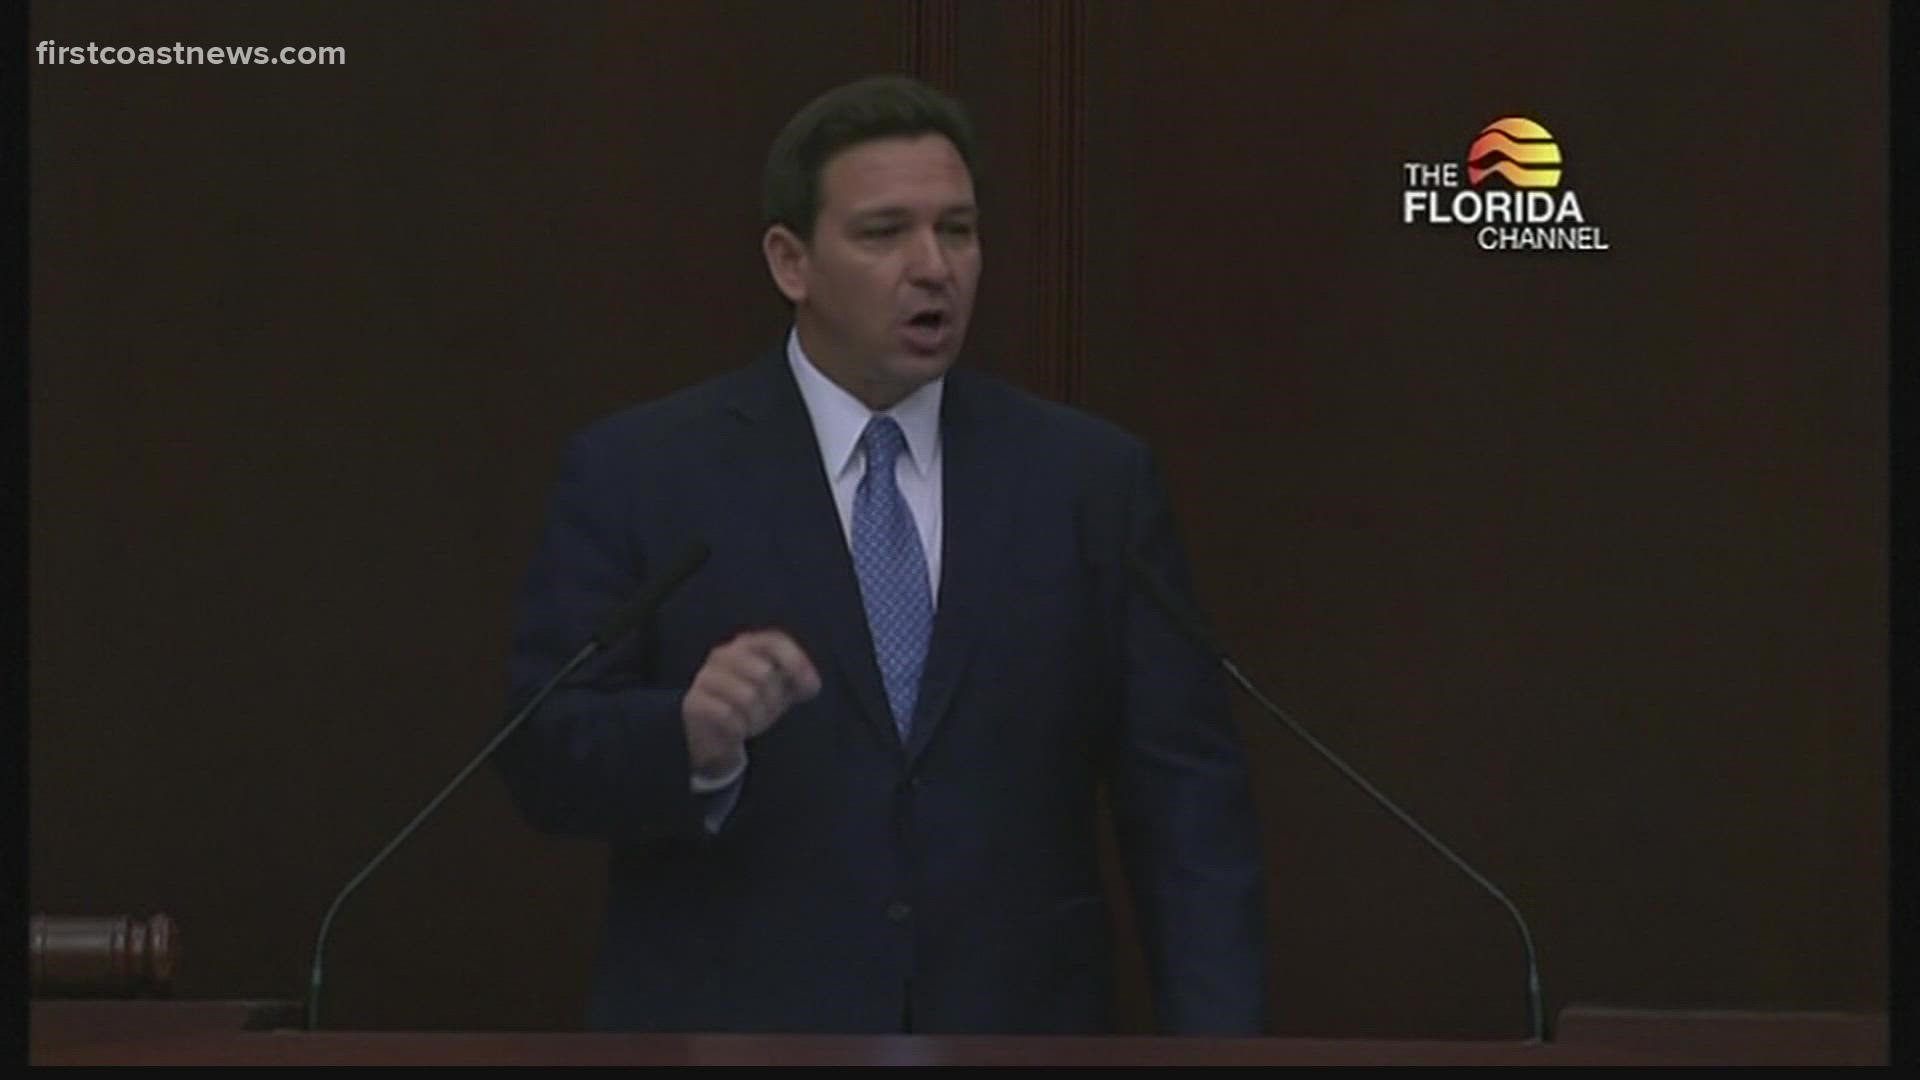 In his State of the State address, the governor called Florida the "freest state in the nation."